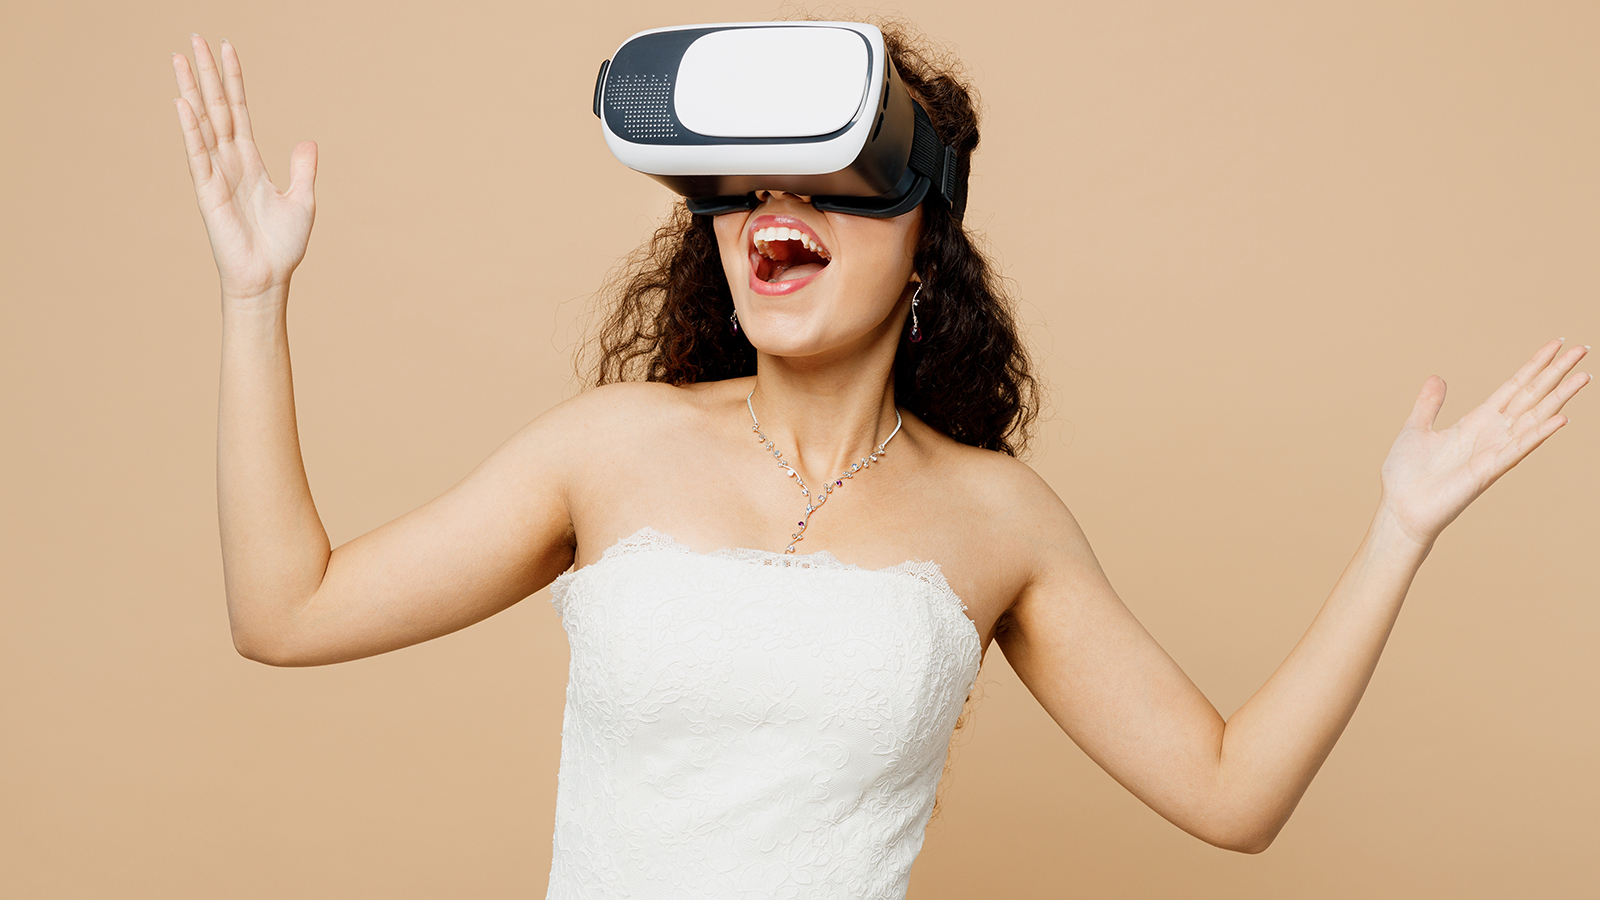 Happy excited beautiful young woman bride wear wedding dress posing watching in vr headset pc gadget isolated on plain pastel light beige background studio portrait. Ceremony celebration party concept